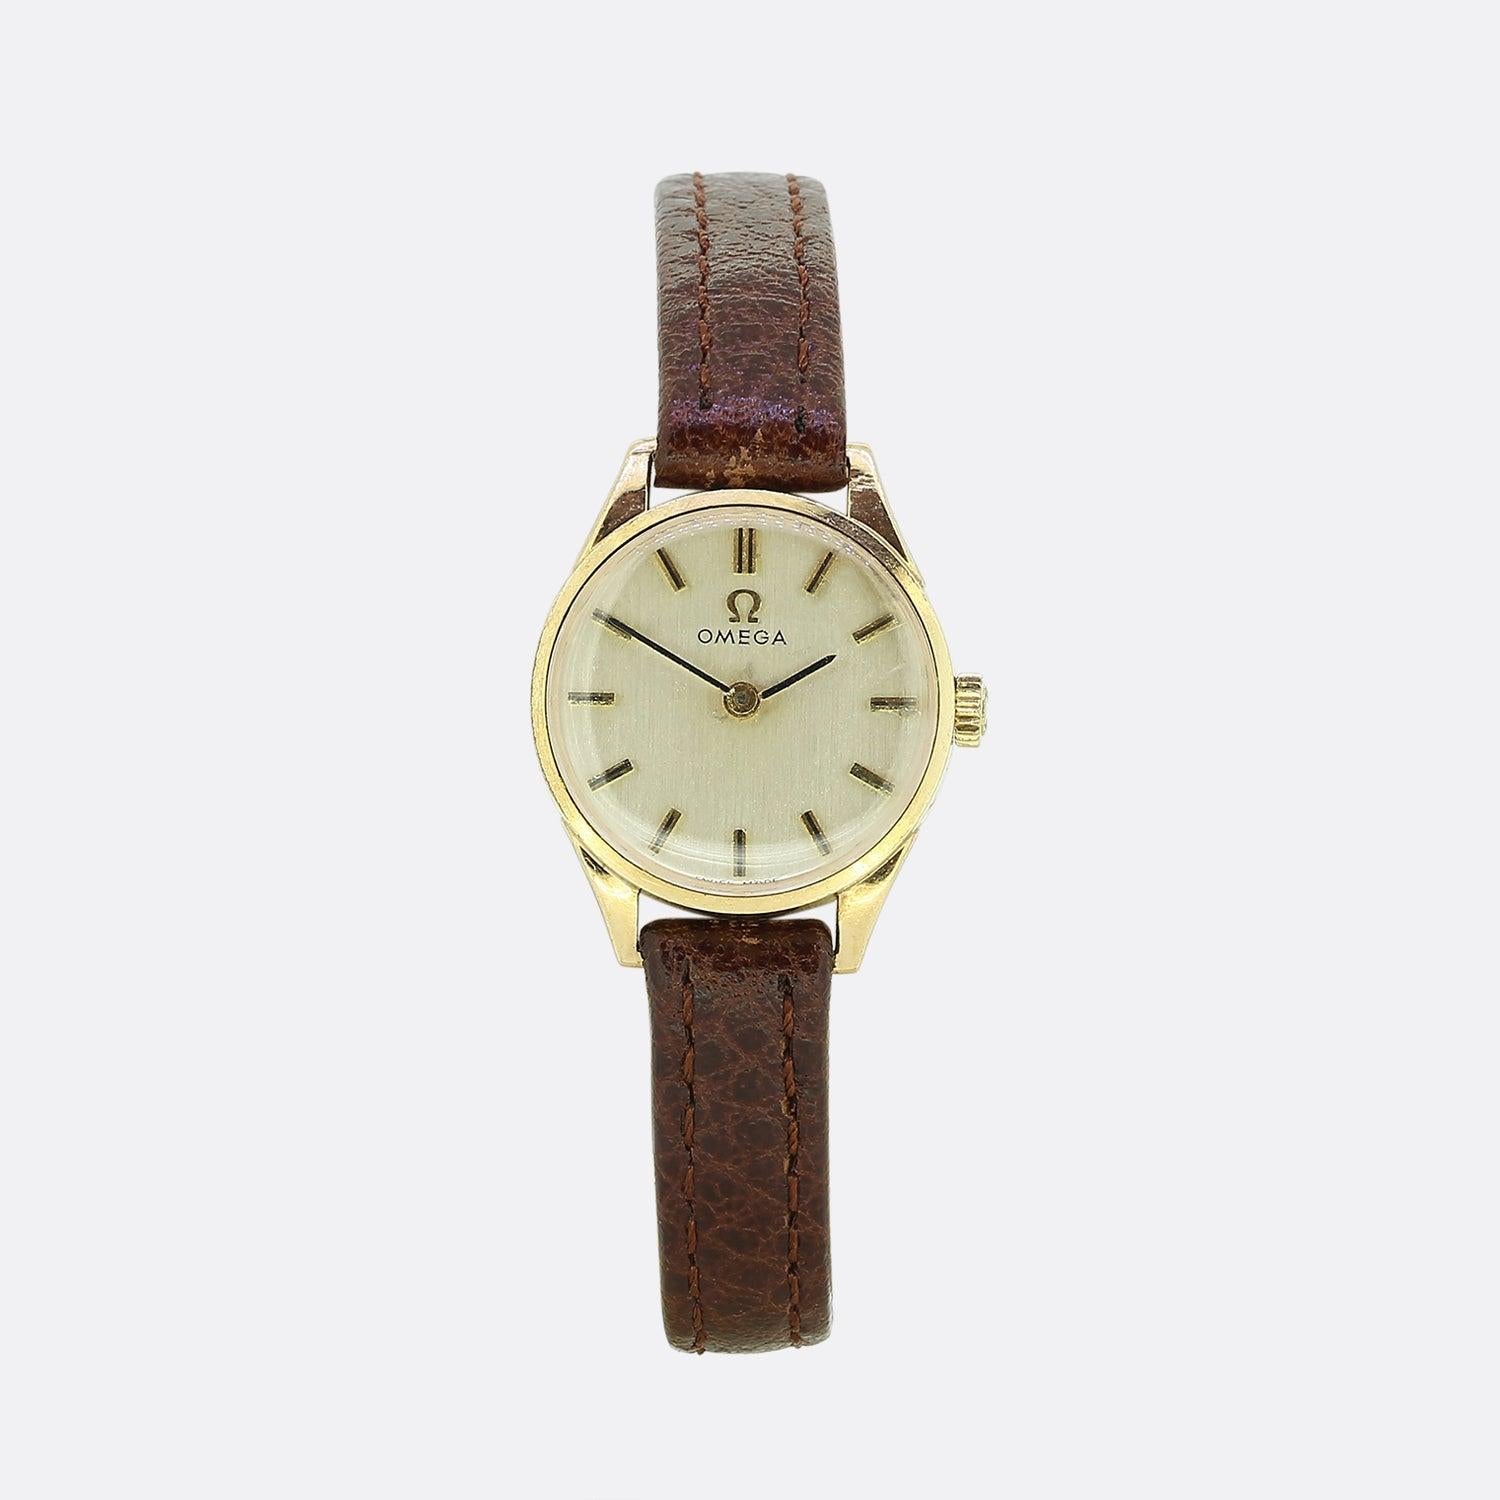 This is a vintage 9ct yellow gold watch from the world renowned classic watchmakers Omega. The watch has a creme dial with sleek gold minute and hour hand with matching batons. The strap and buckle have been replaced but the vintage leather brown